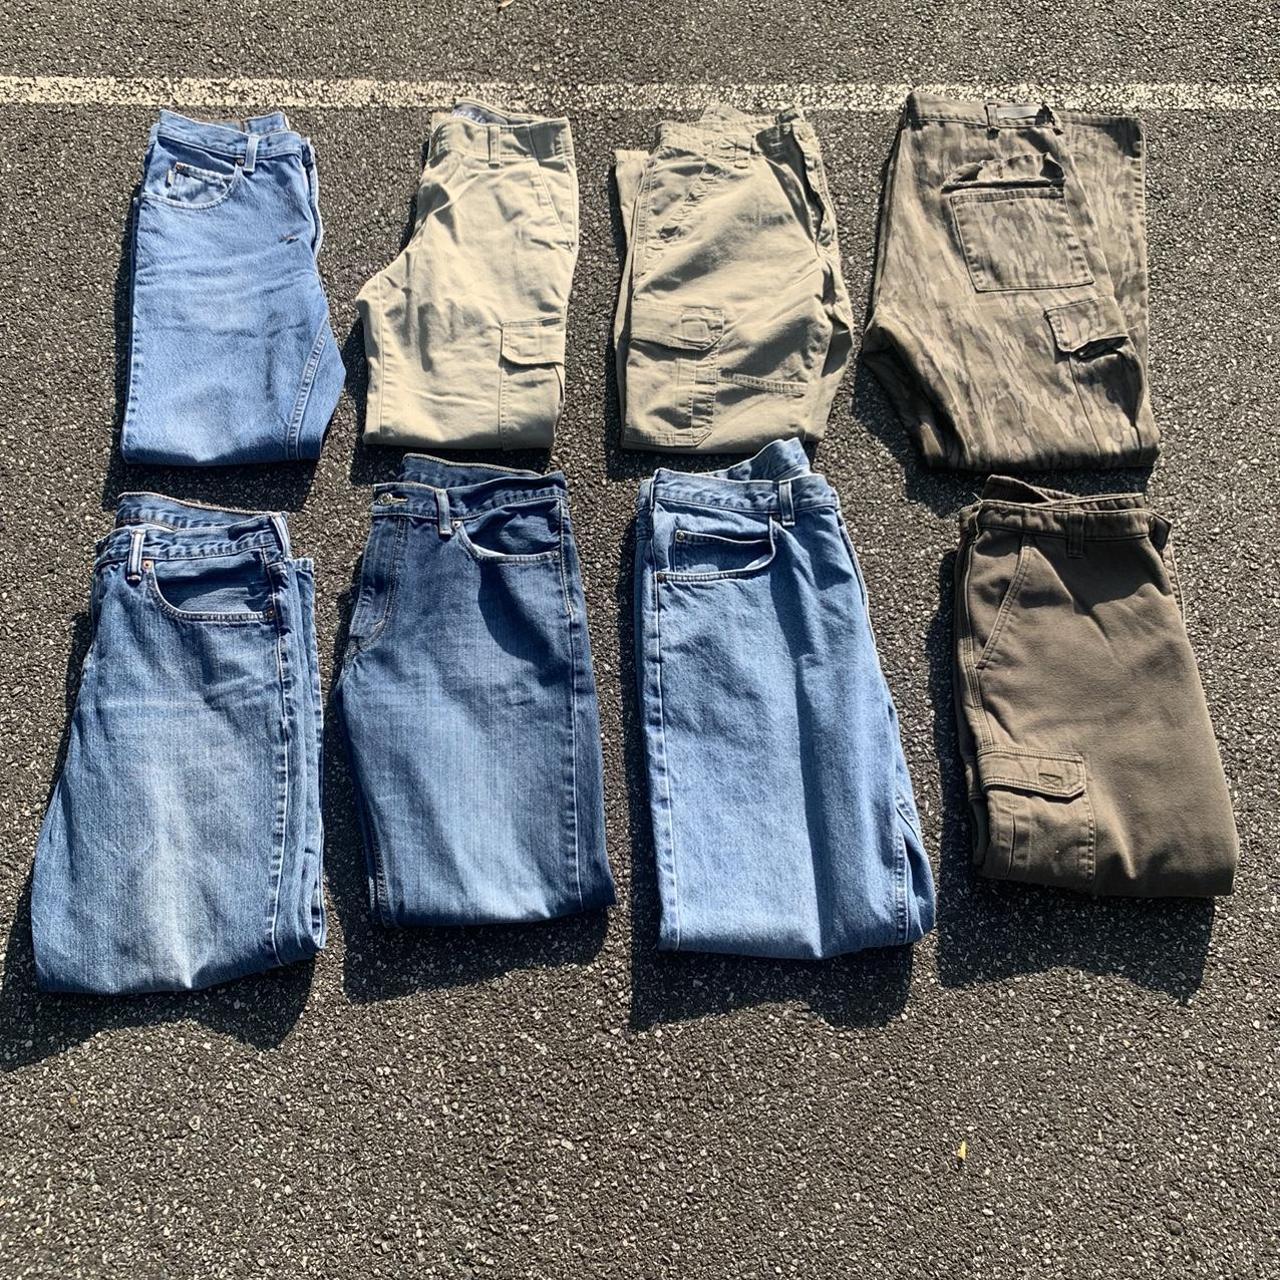 DO NOT BUY, WONT REFUND Jeans and cargos Check out... - Depop